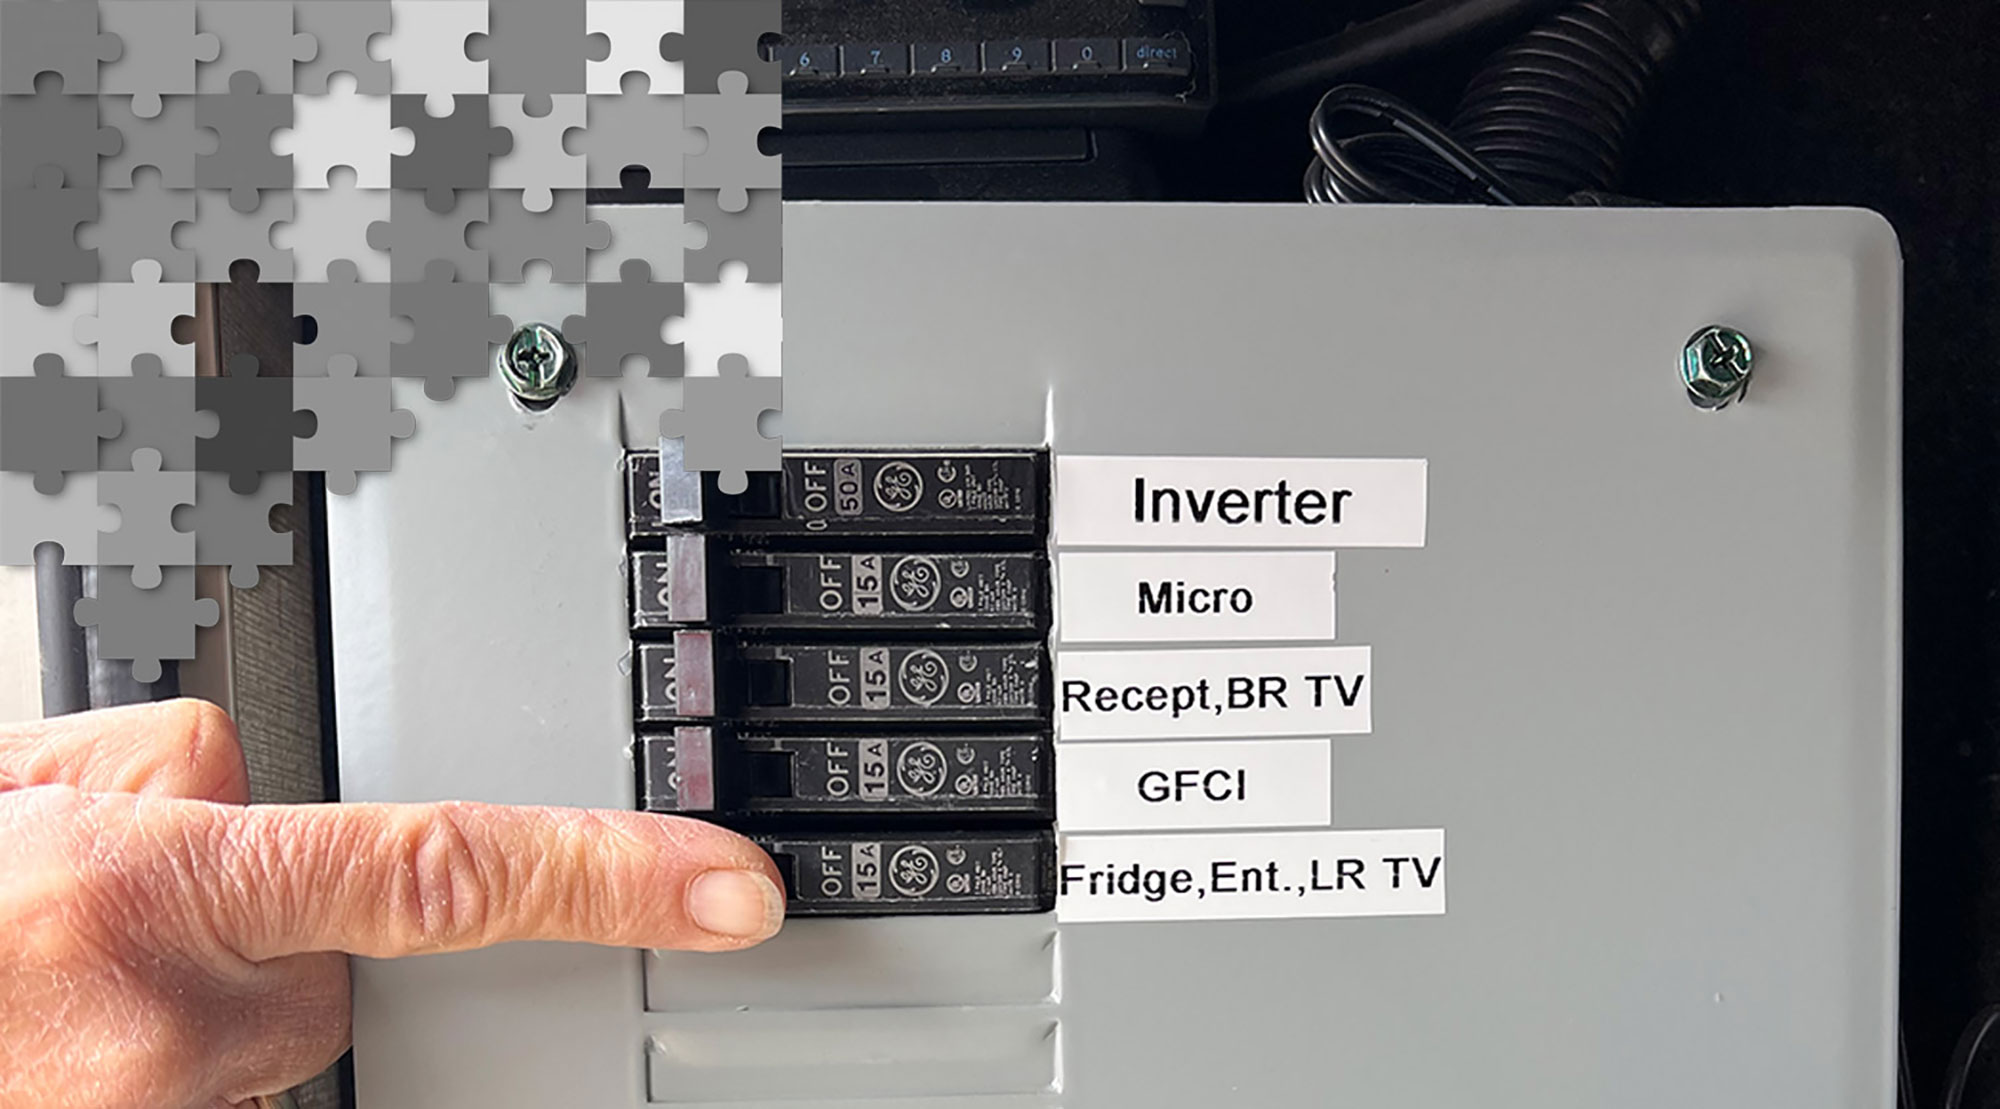 a finger points to a tab on a fuse box